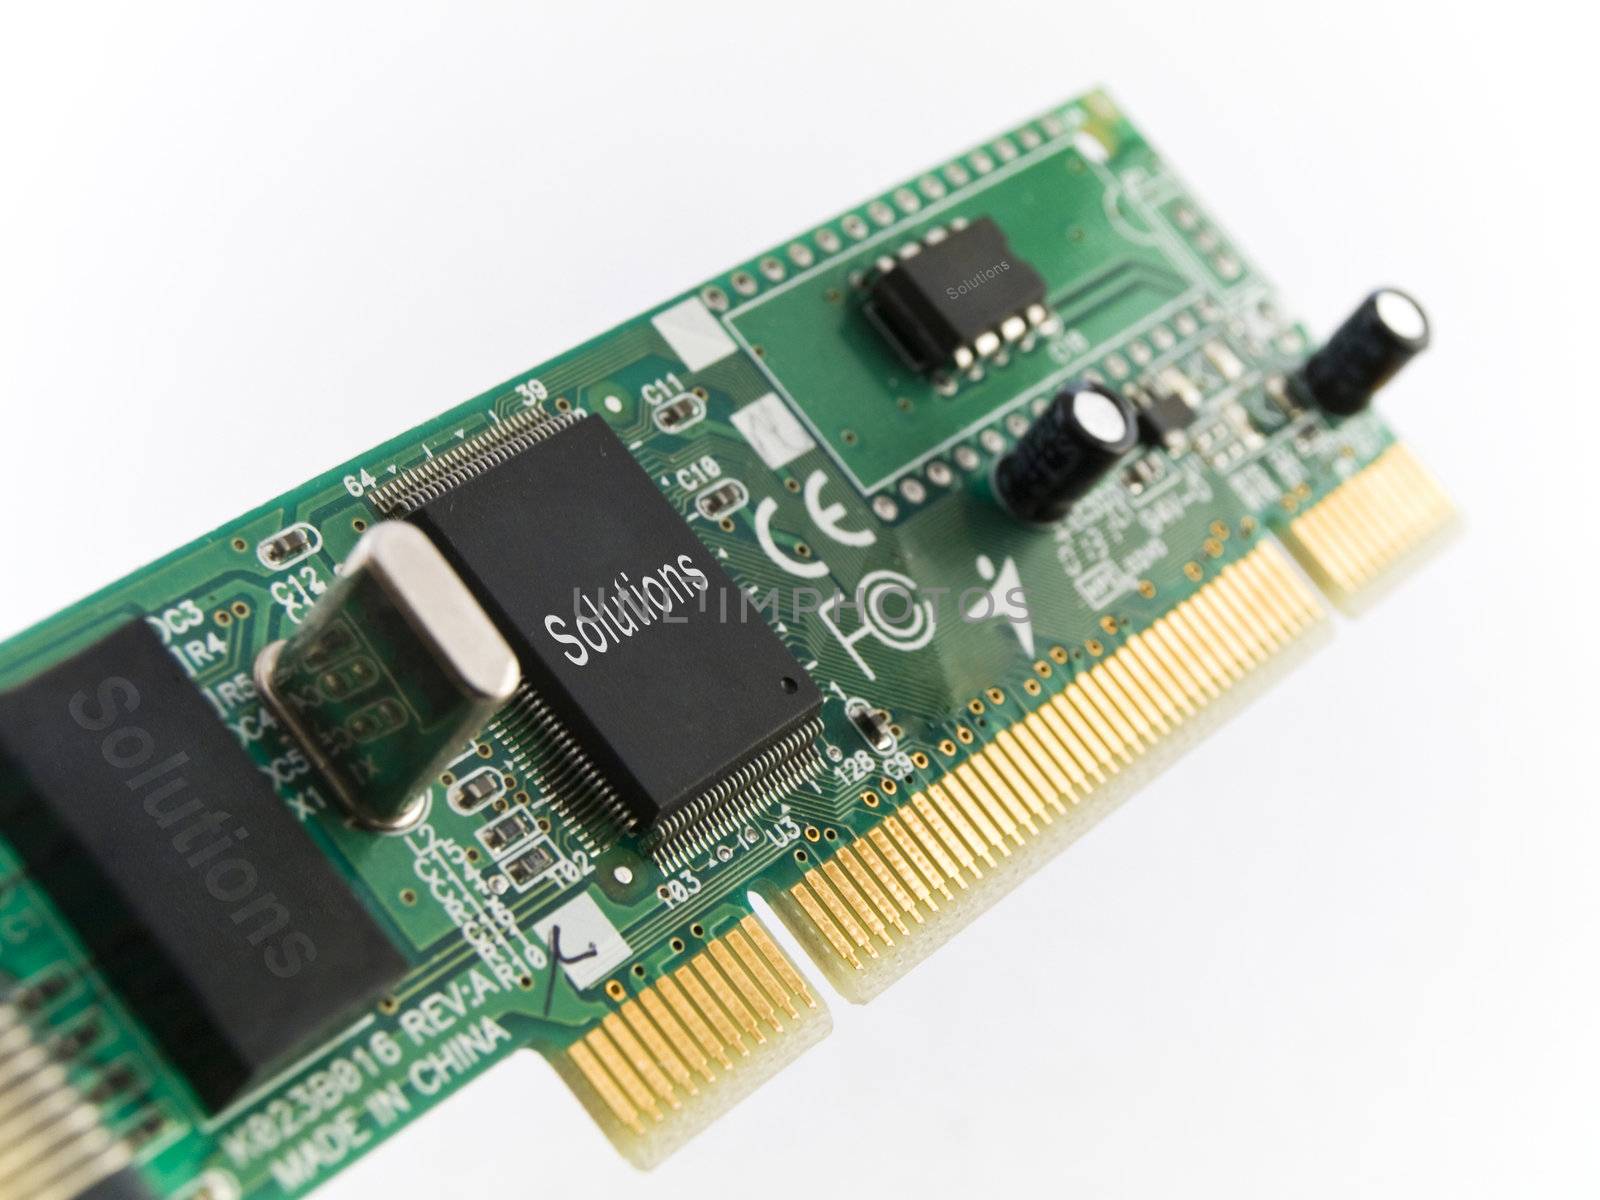 Solutions Circuit Board PCI on White Background by bobbigmac